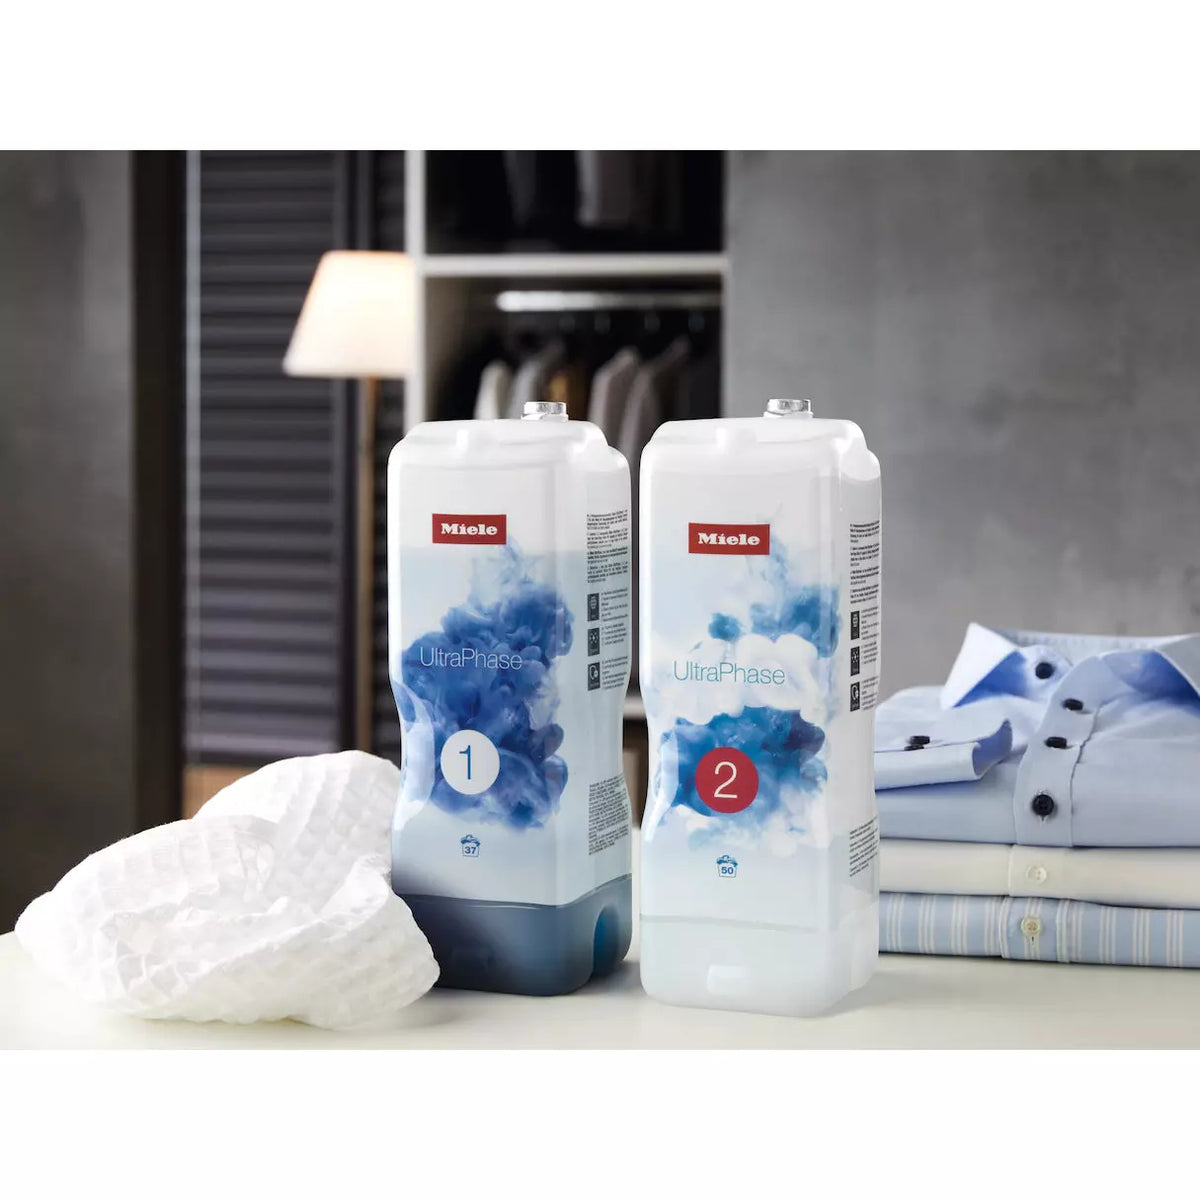 Miele UltraPhase 2 2-component Detergent for Whites, Colours &amp; Delicates | 11891800 from Miele - DID Electrical